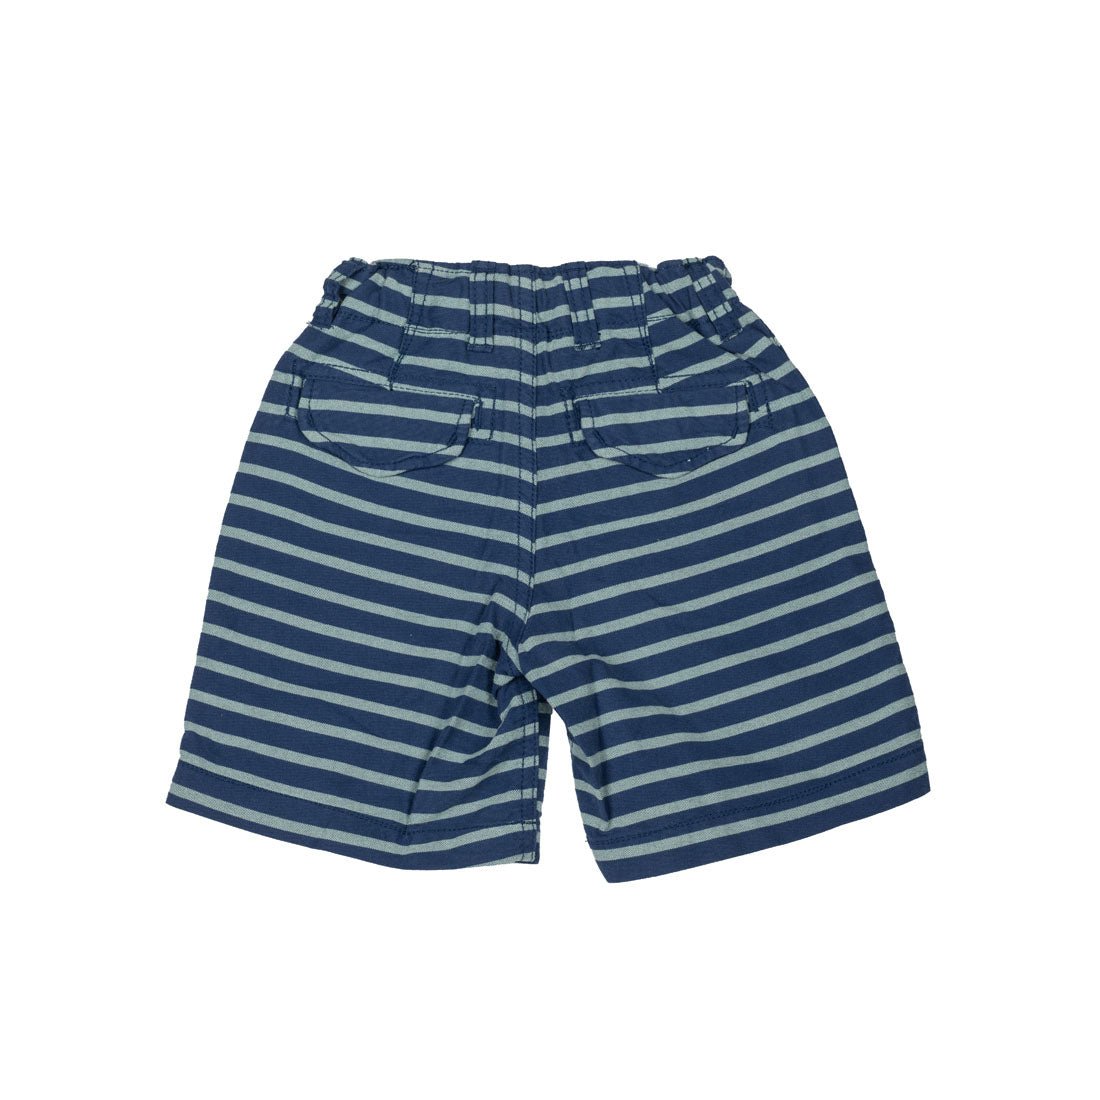 Gap Shorts For Boys. - mymadstore.com